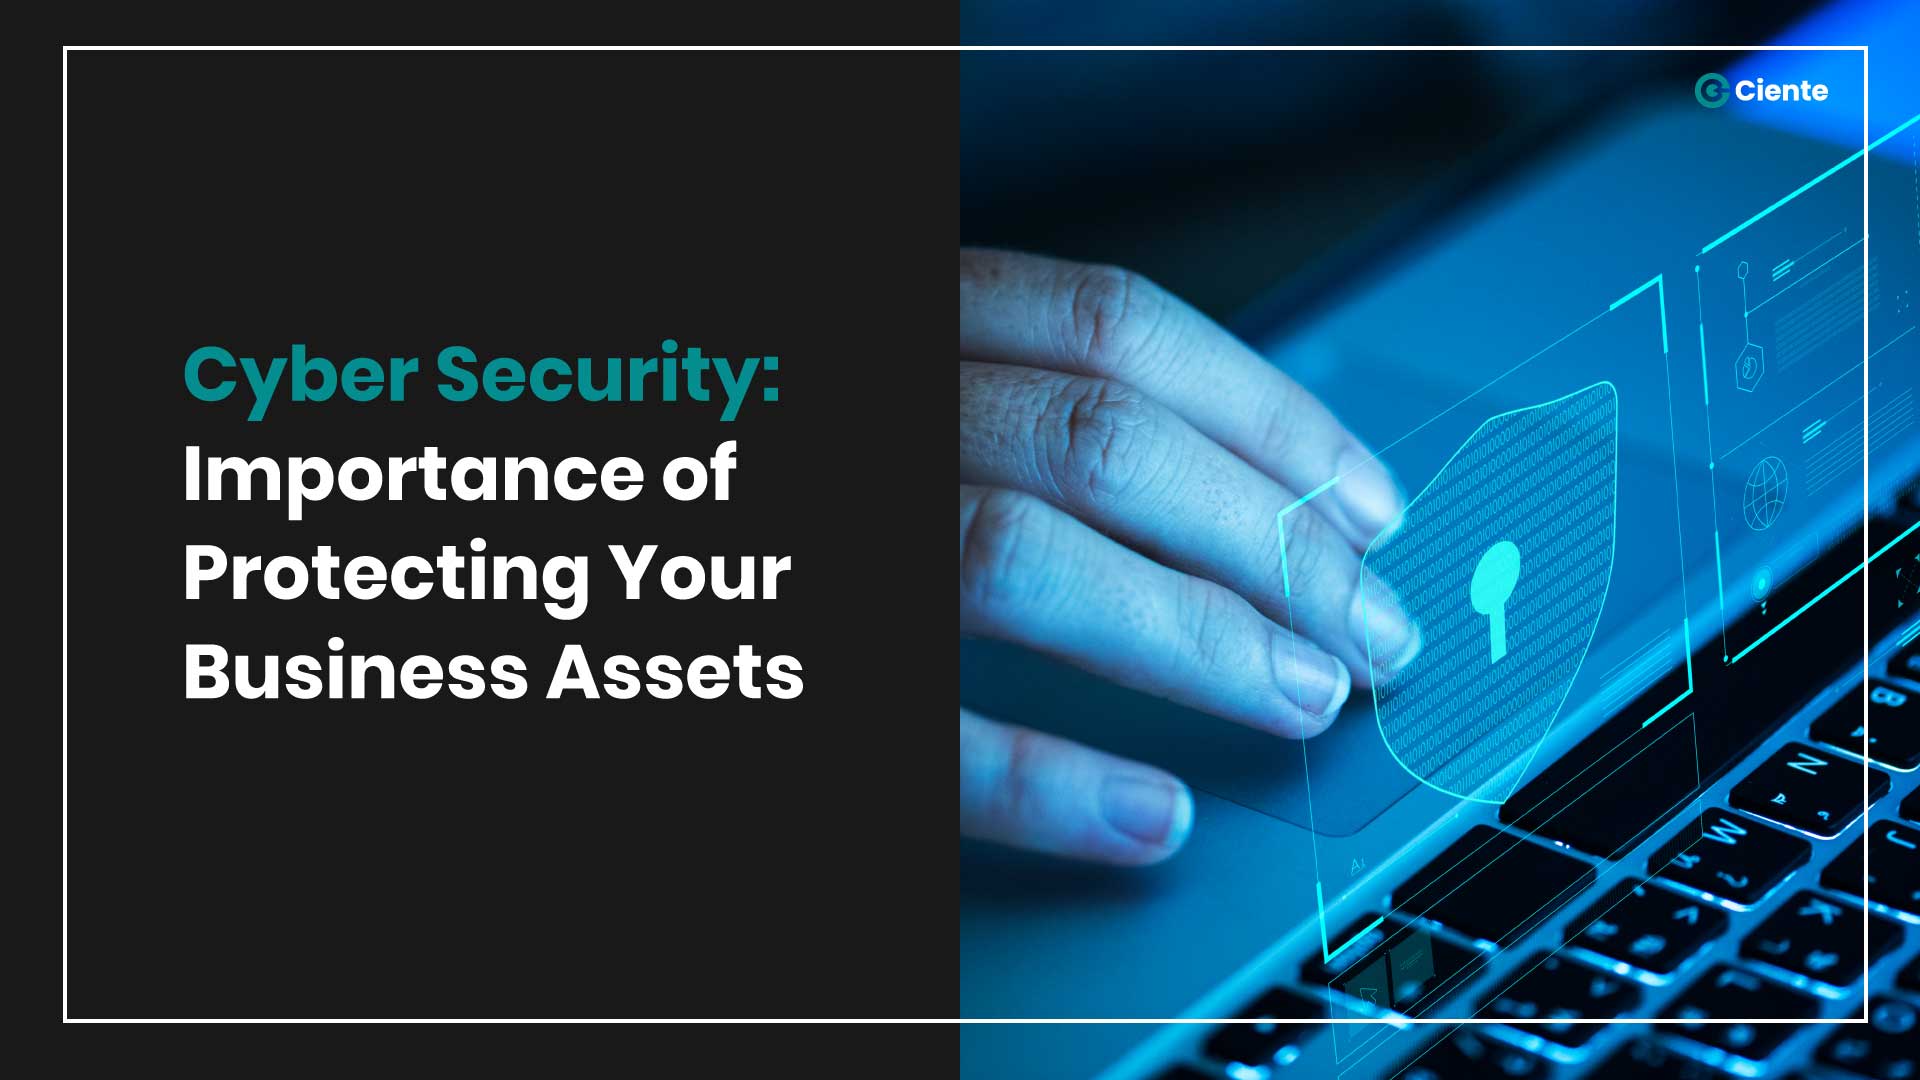 Cyber Security: Importance of Protecting Your Business Assets